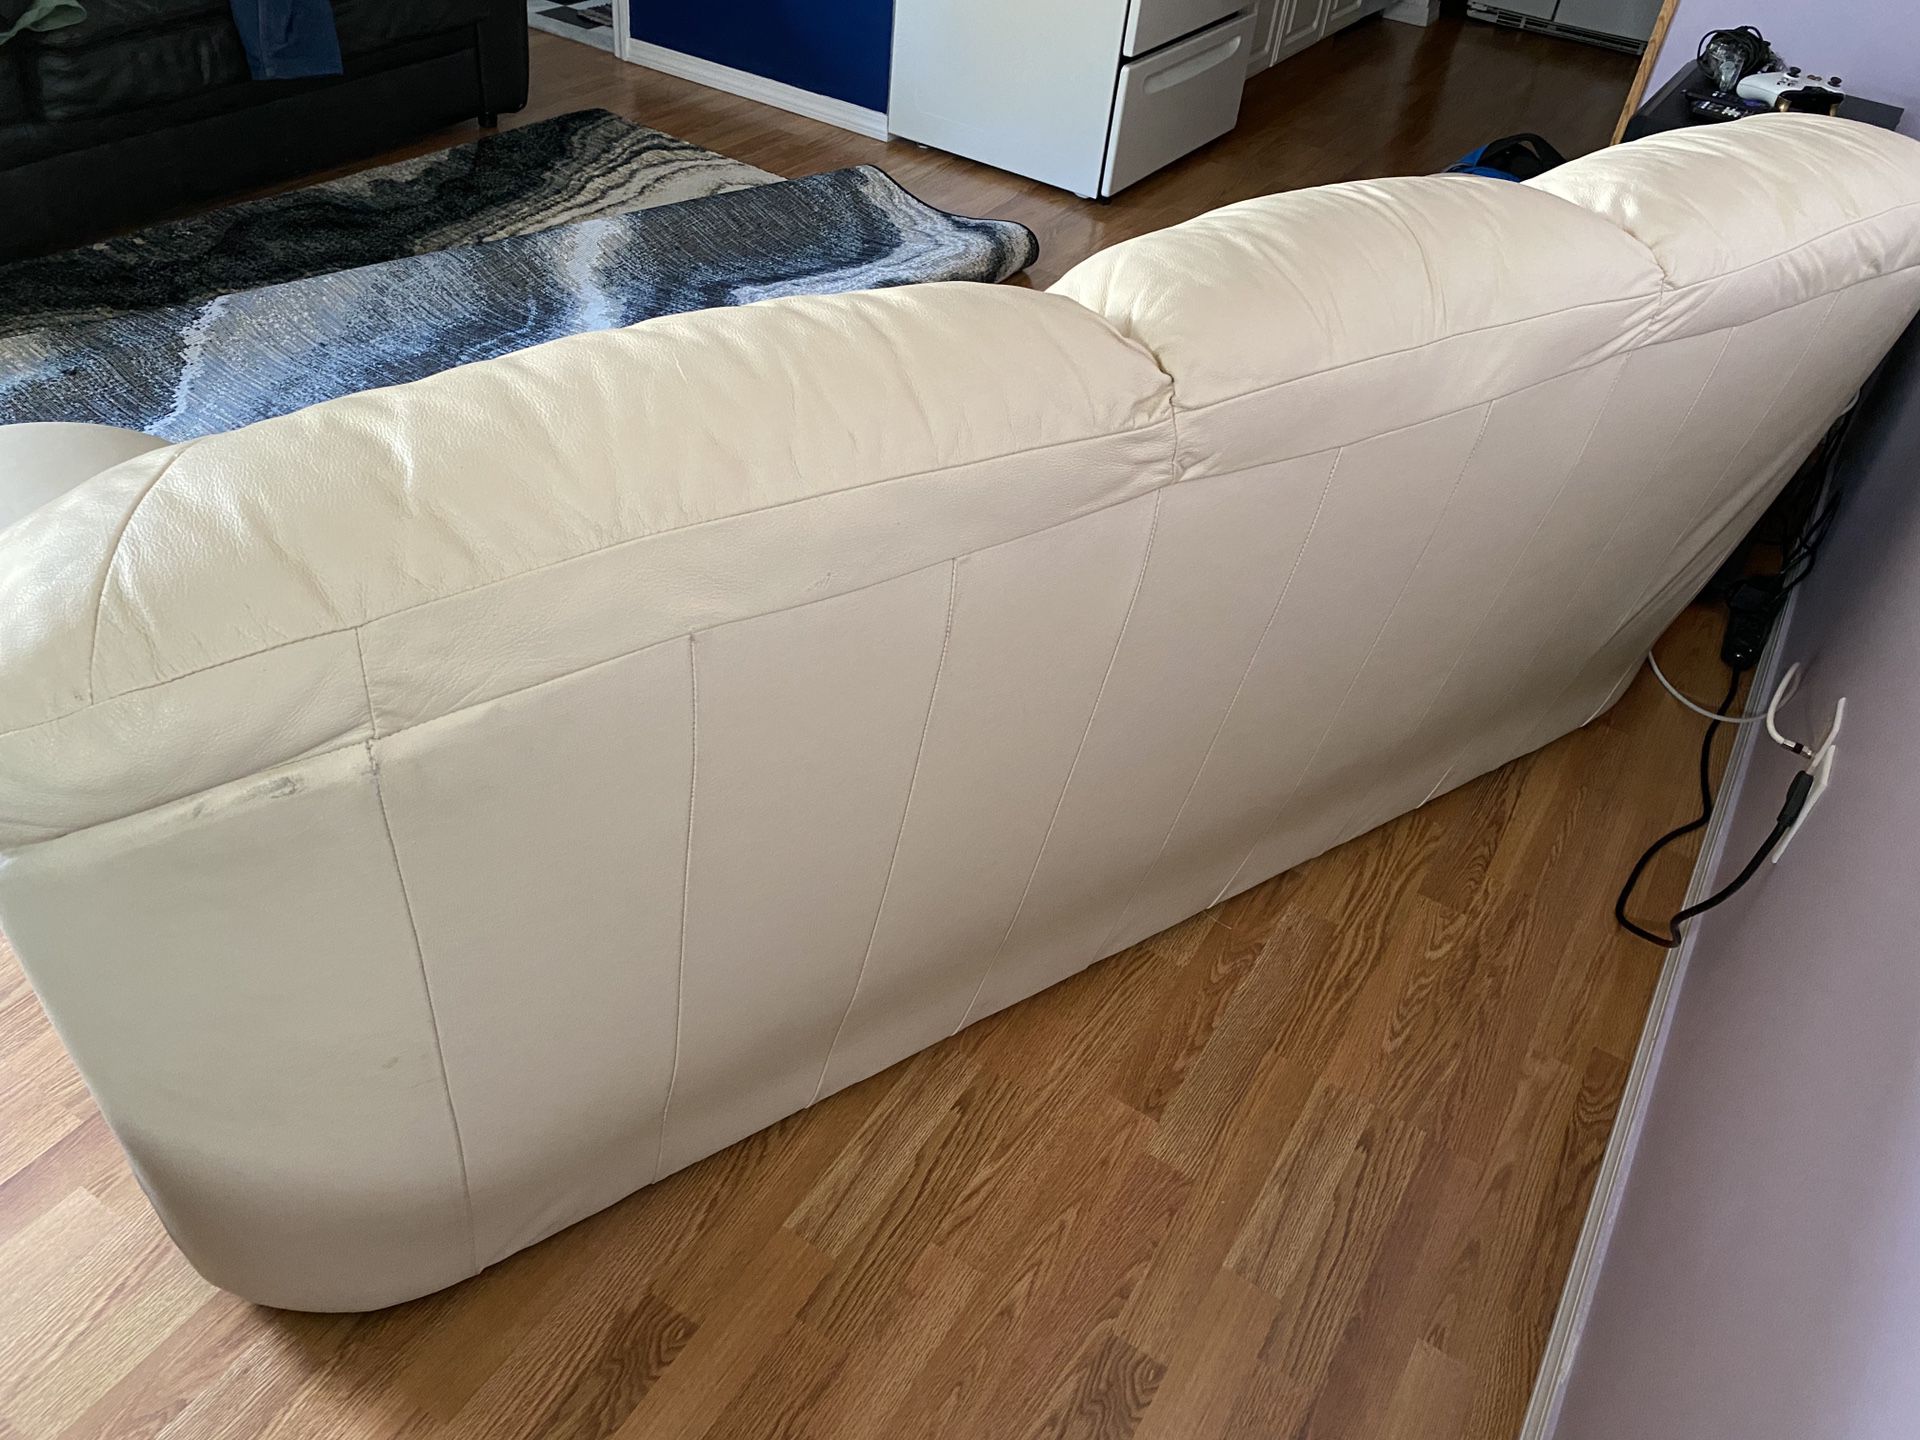 New white leather couch